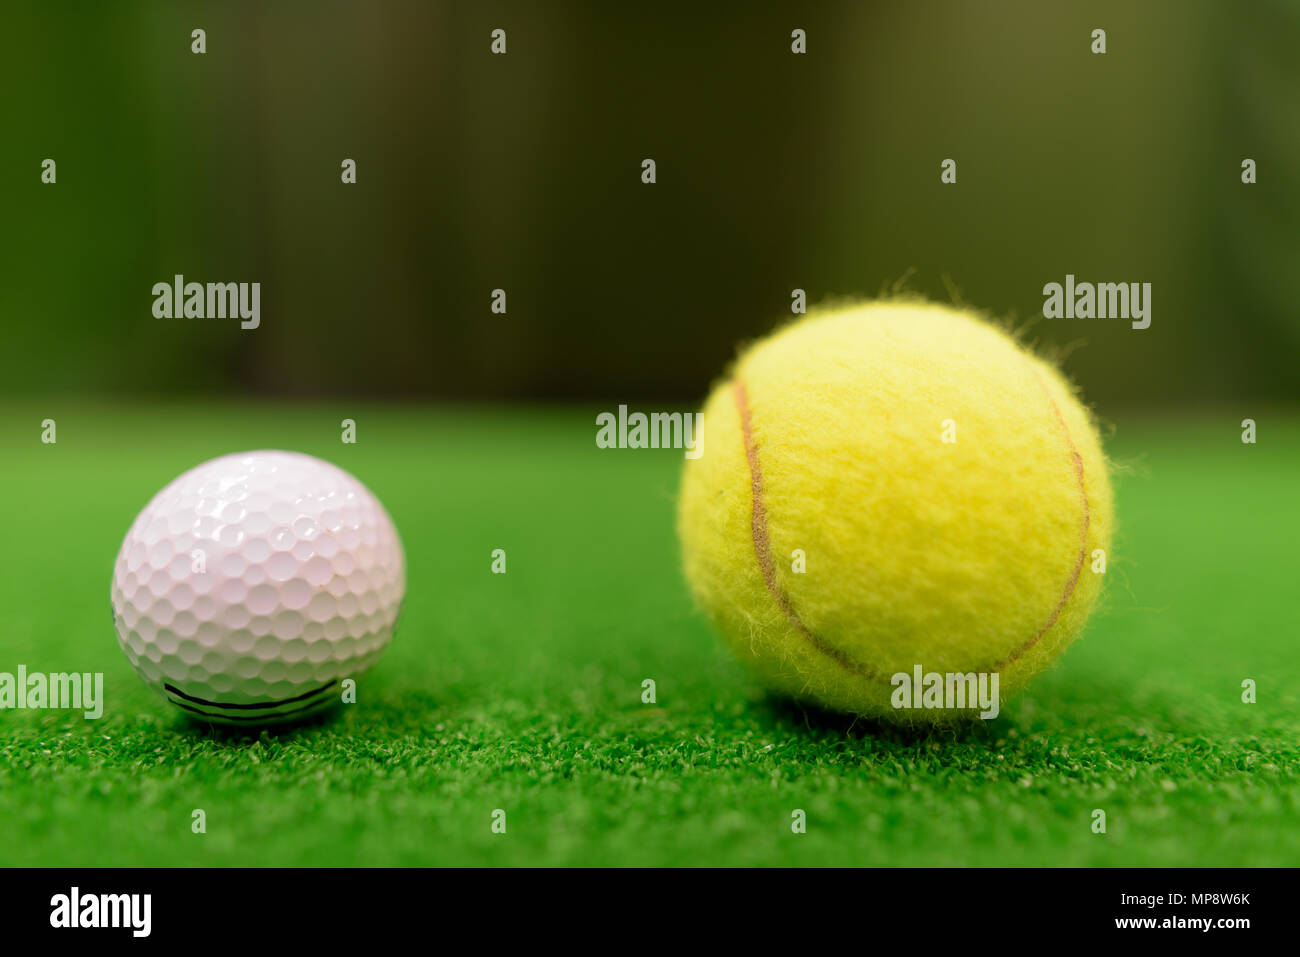 Golf Ball And Tennis Ball On Green Surface Stock Photo